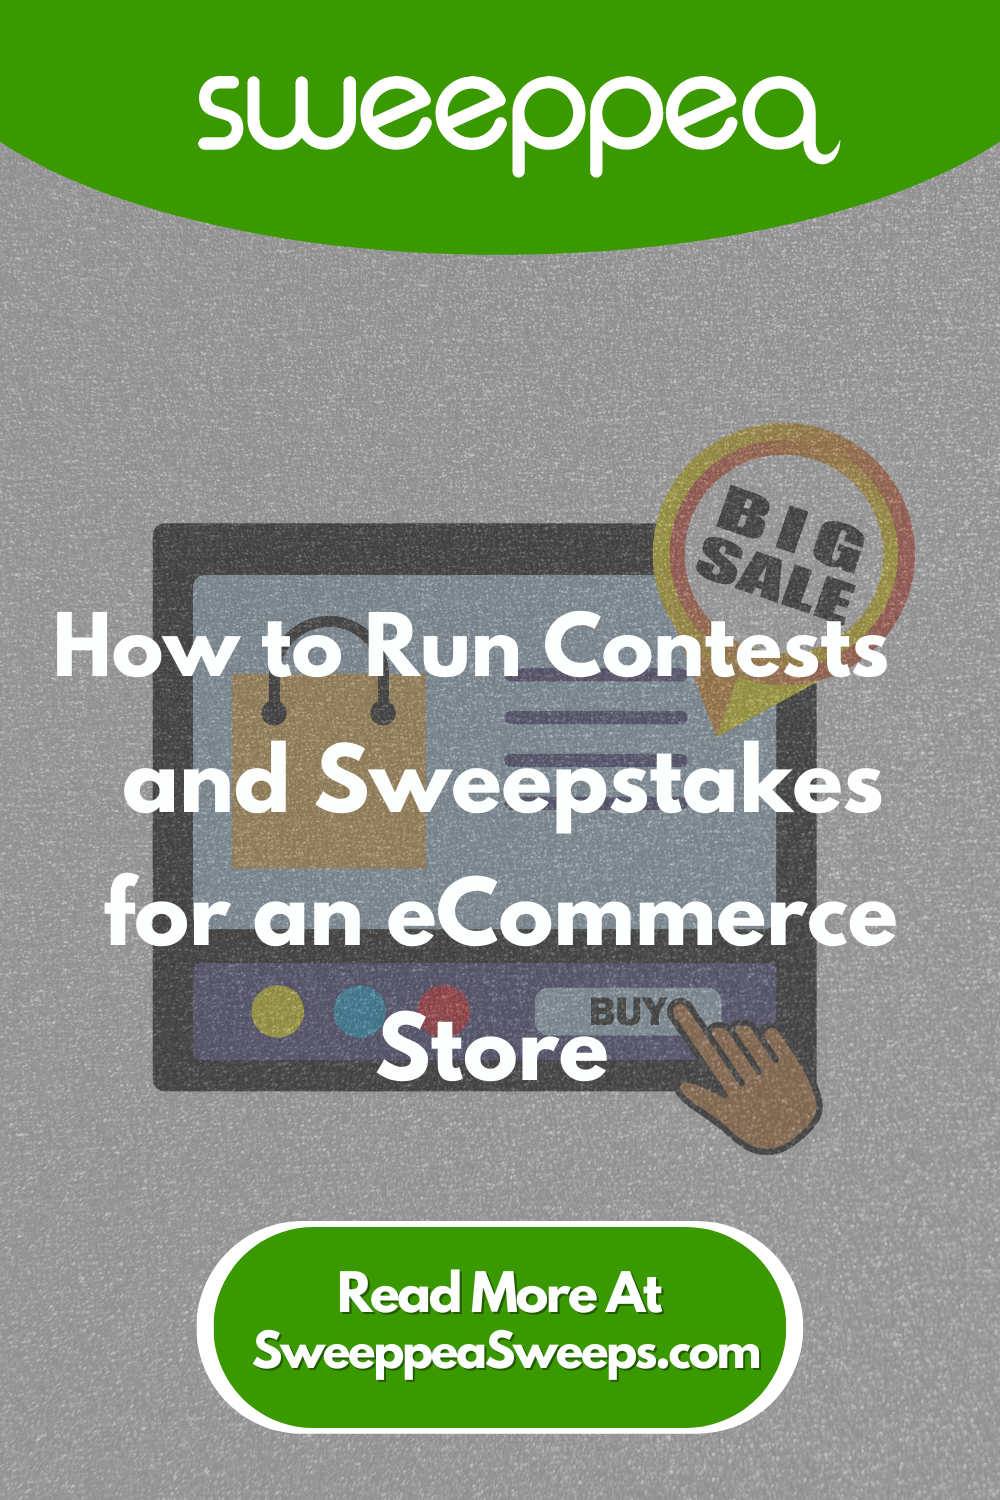 Create Giveaways, Contests and Promotions